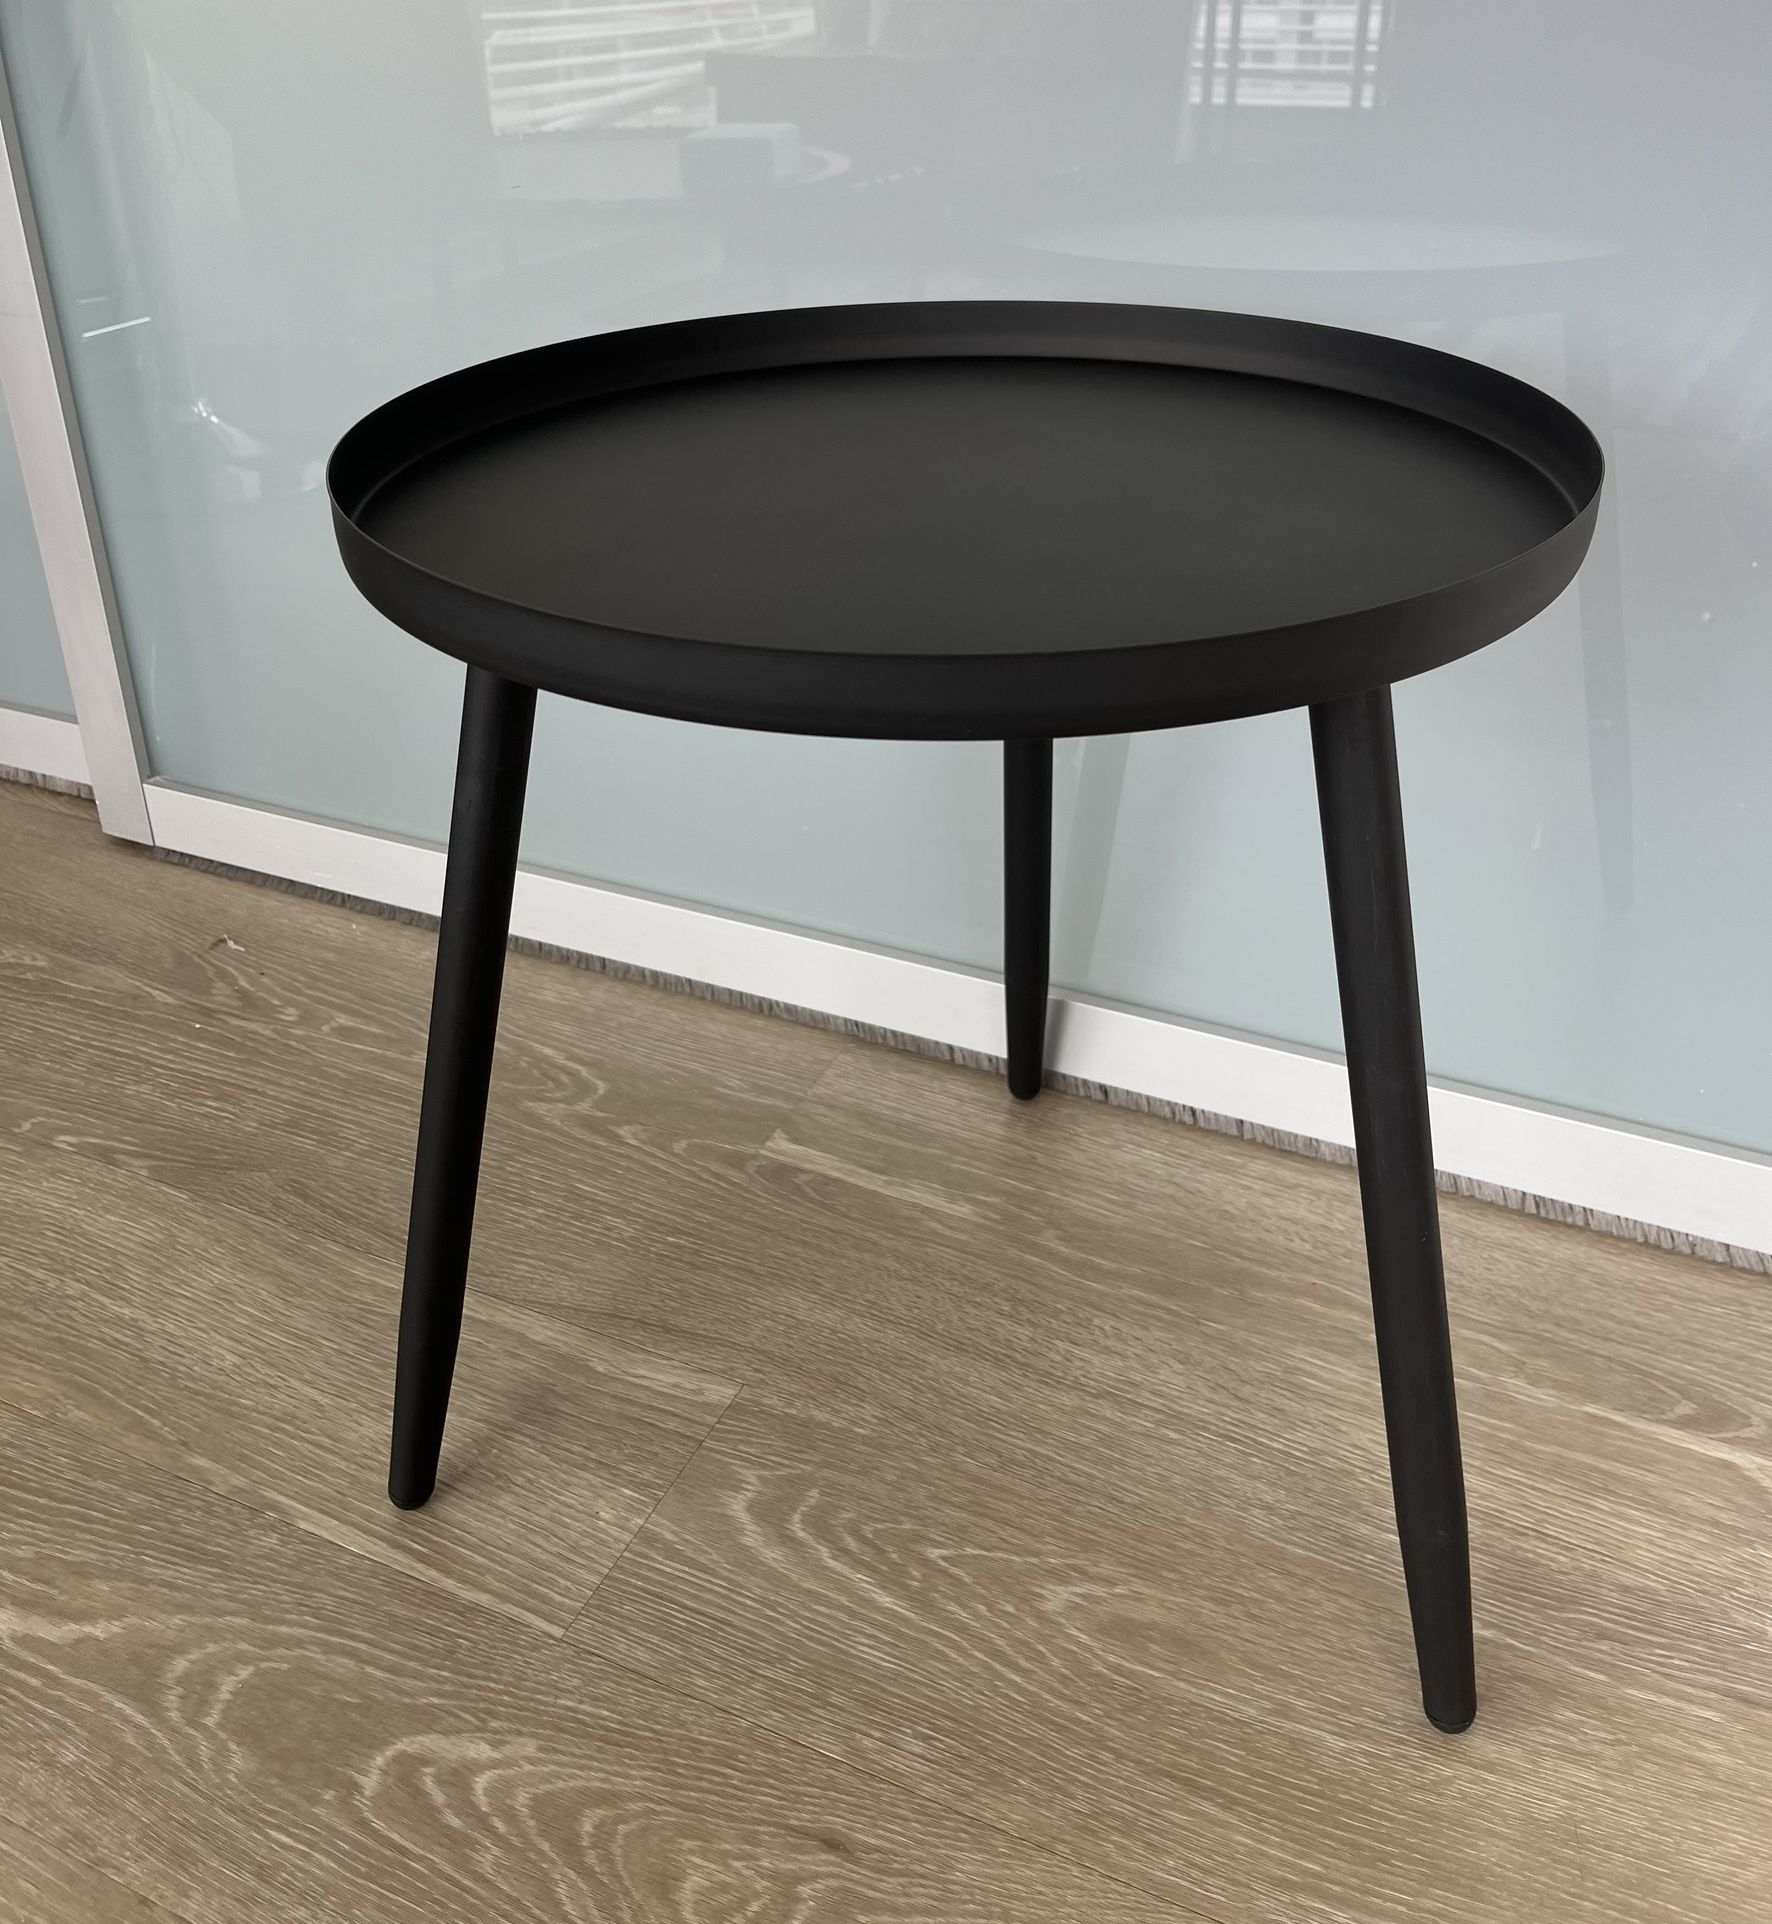 AOJEZOR Accent Side / End Table